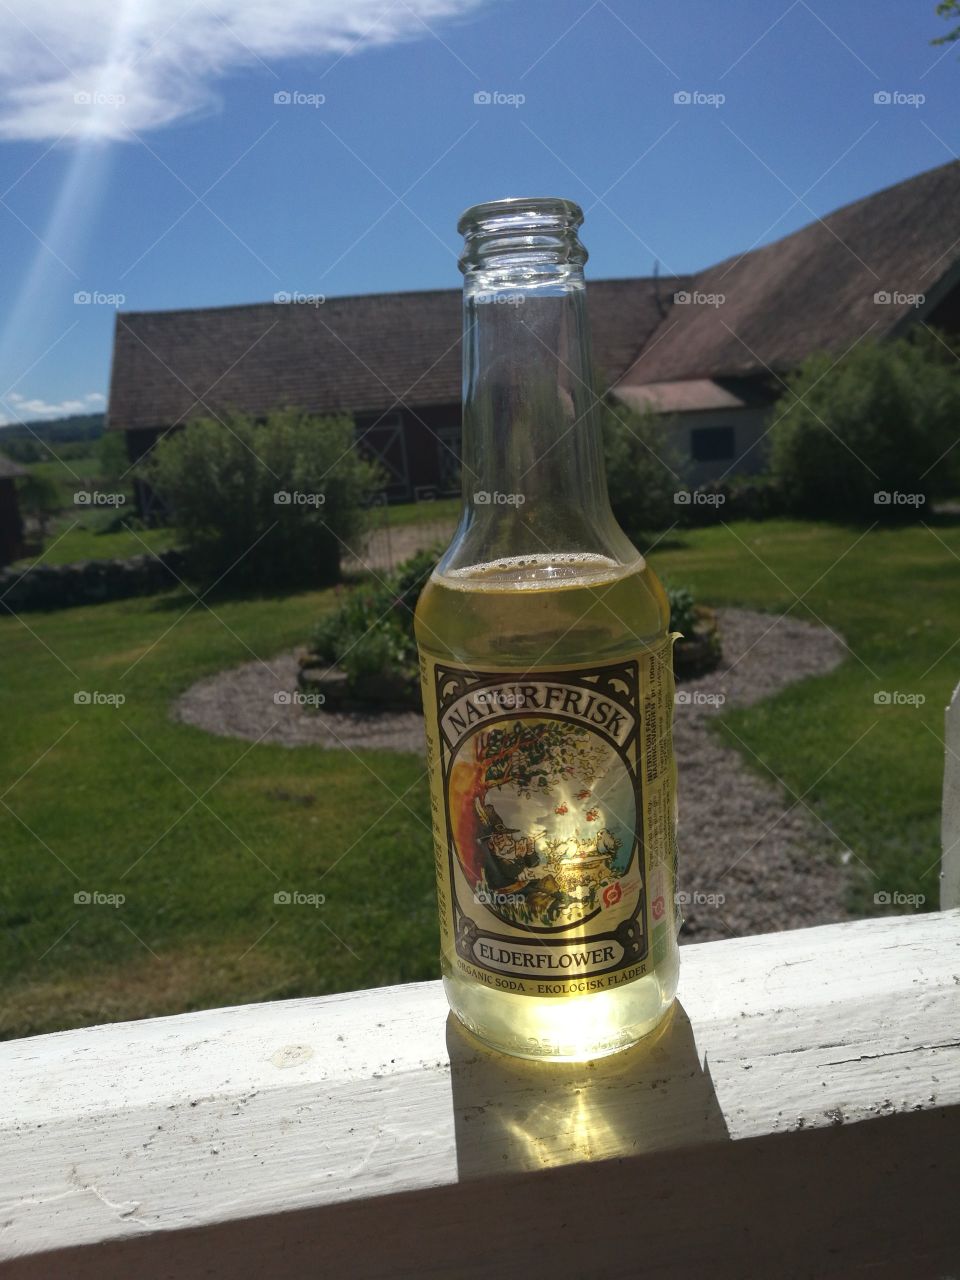 pic of a organic soda whit eldflower taste. in the backrond my grandmother and grandfathers yard in sweden.